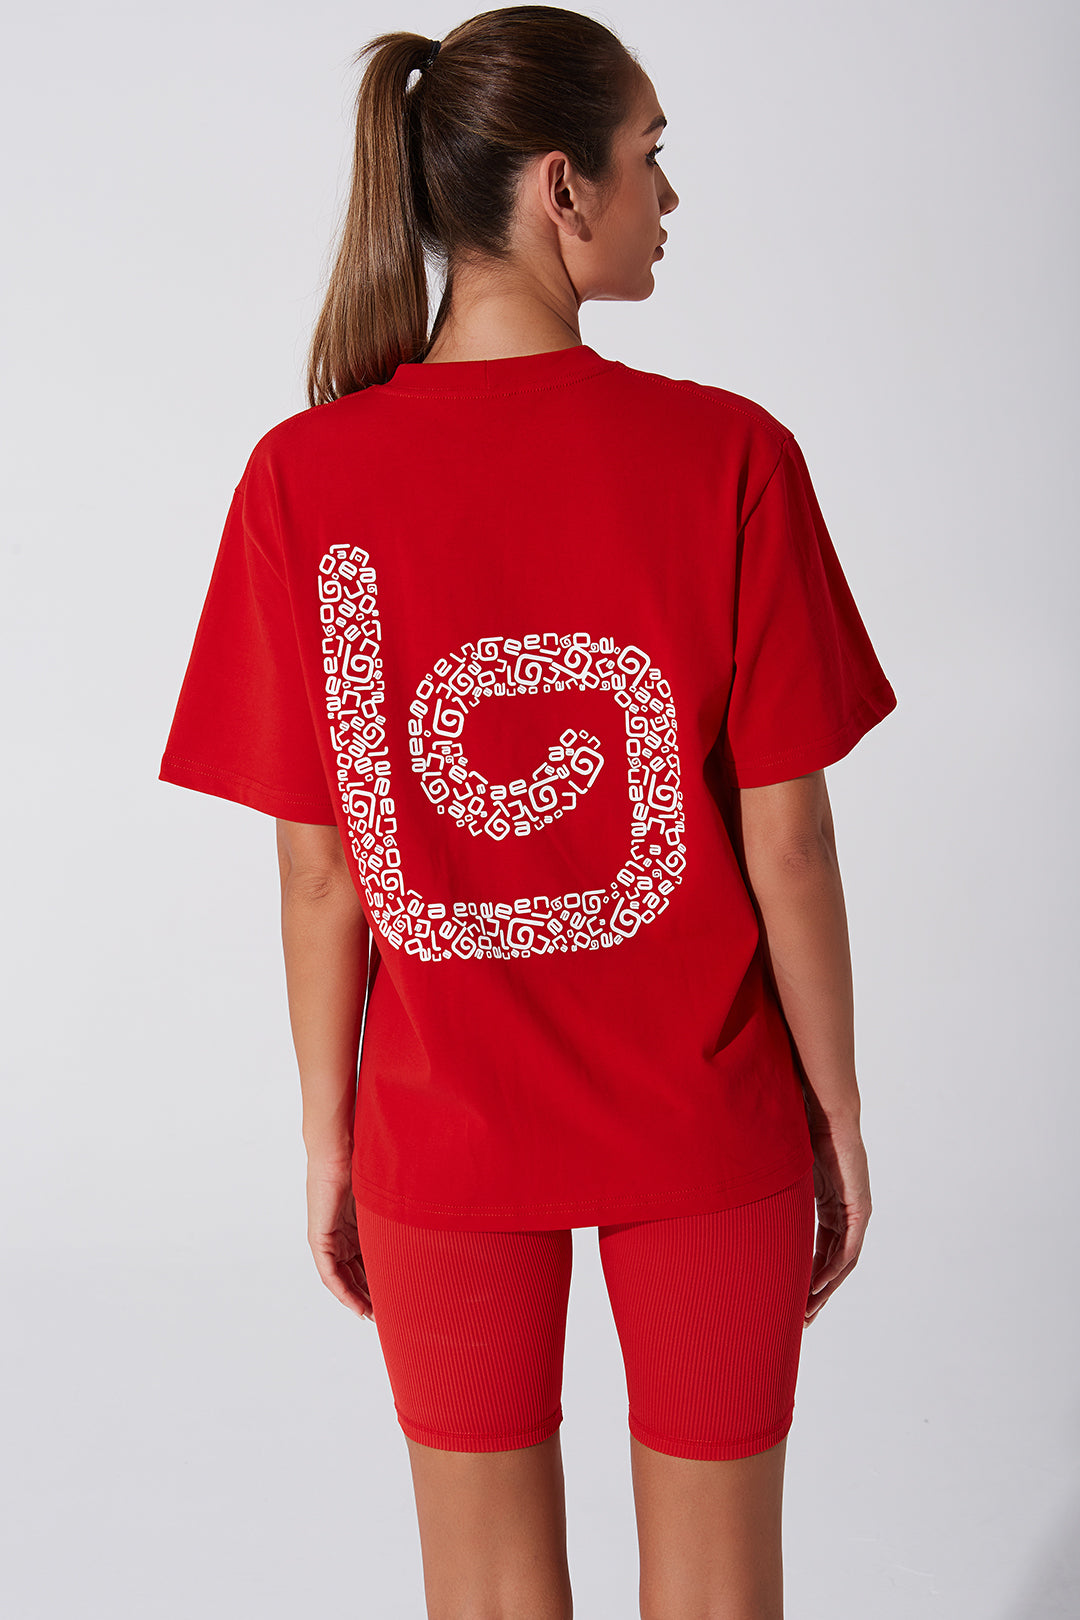 Unisex red short sleeve tee for women - Limited edition - OW-0173-WSS-RD_2.jpg